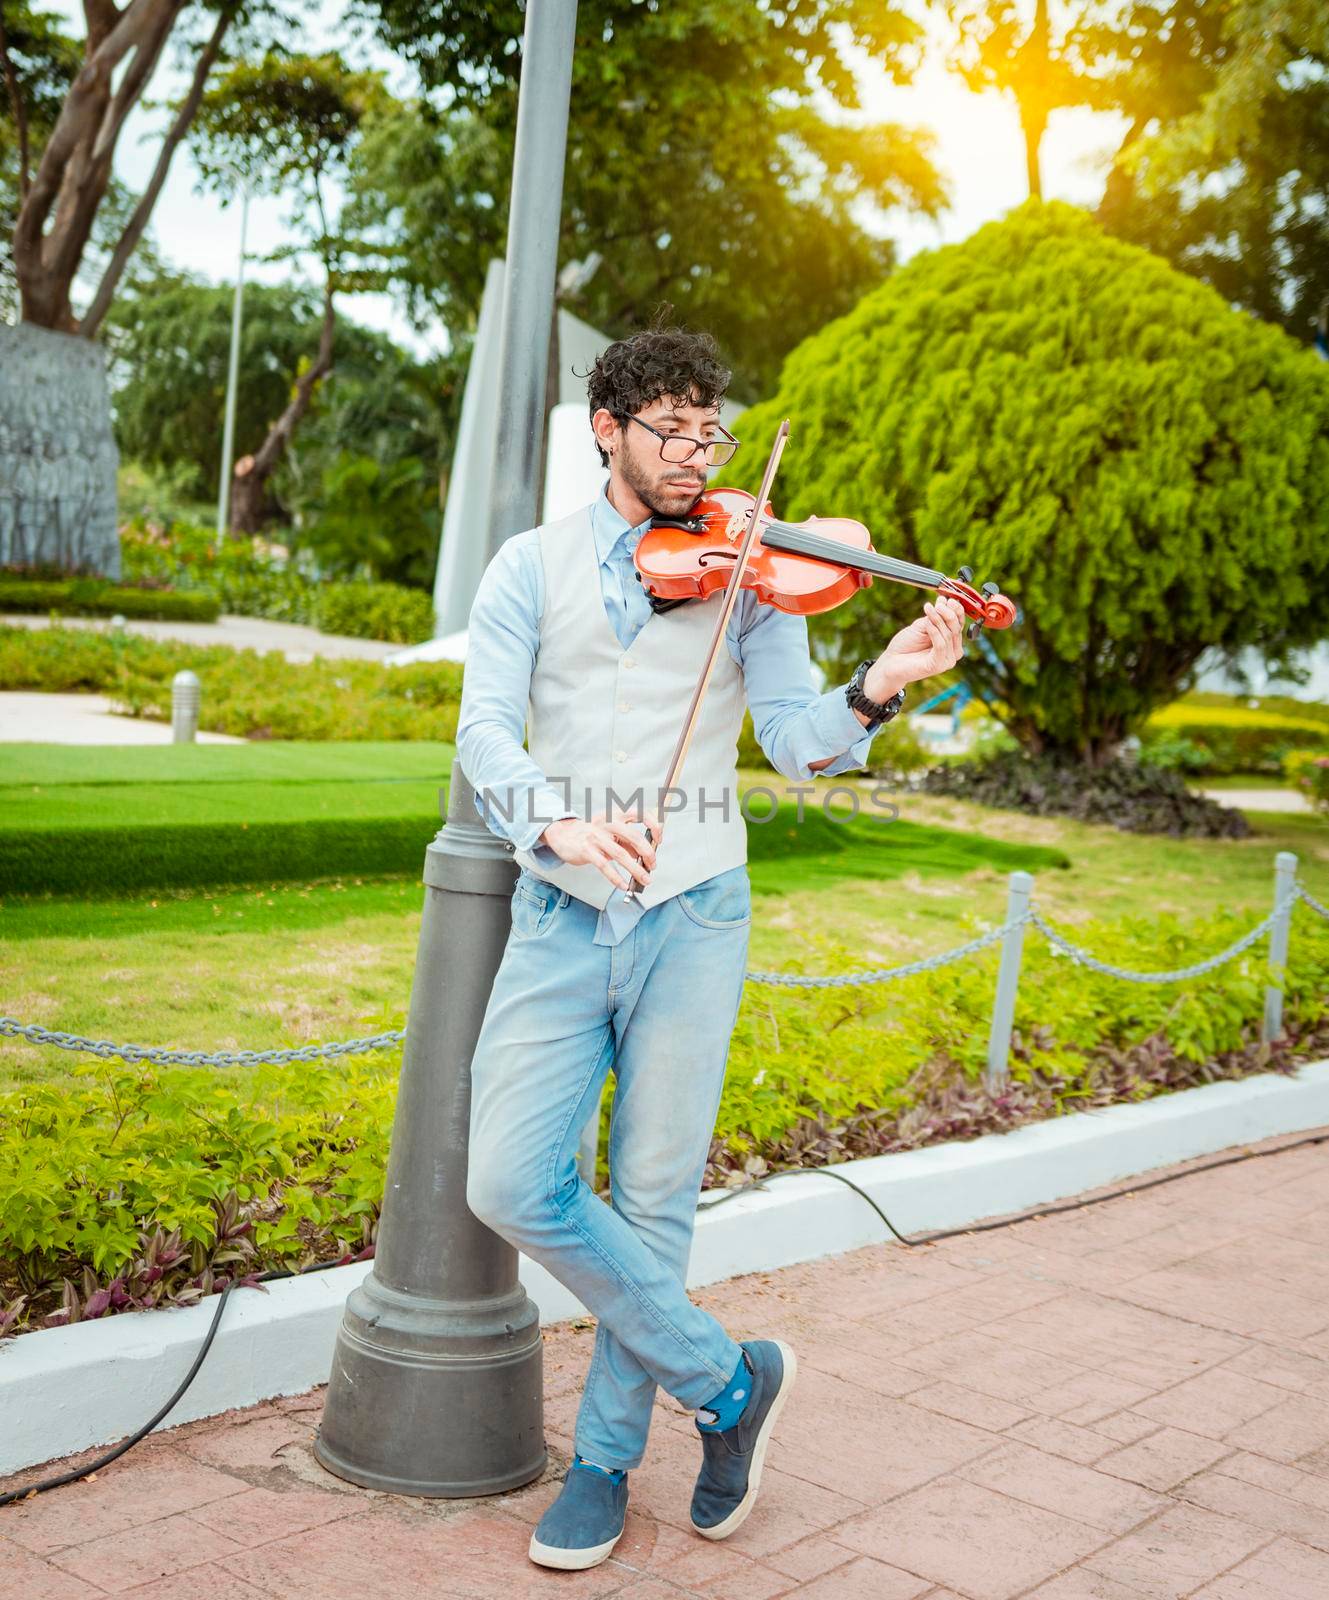 Portrait of man playing violin in the street. Jacket artist playing violin outdoors, Image of a person playing violin outdoors. Man playing violin in the street by isaiphoto